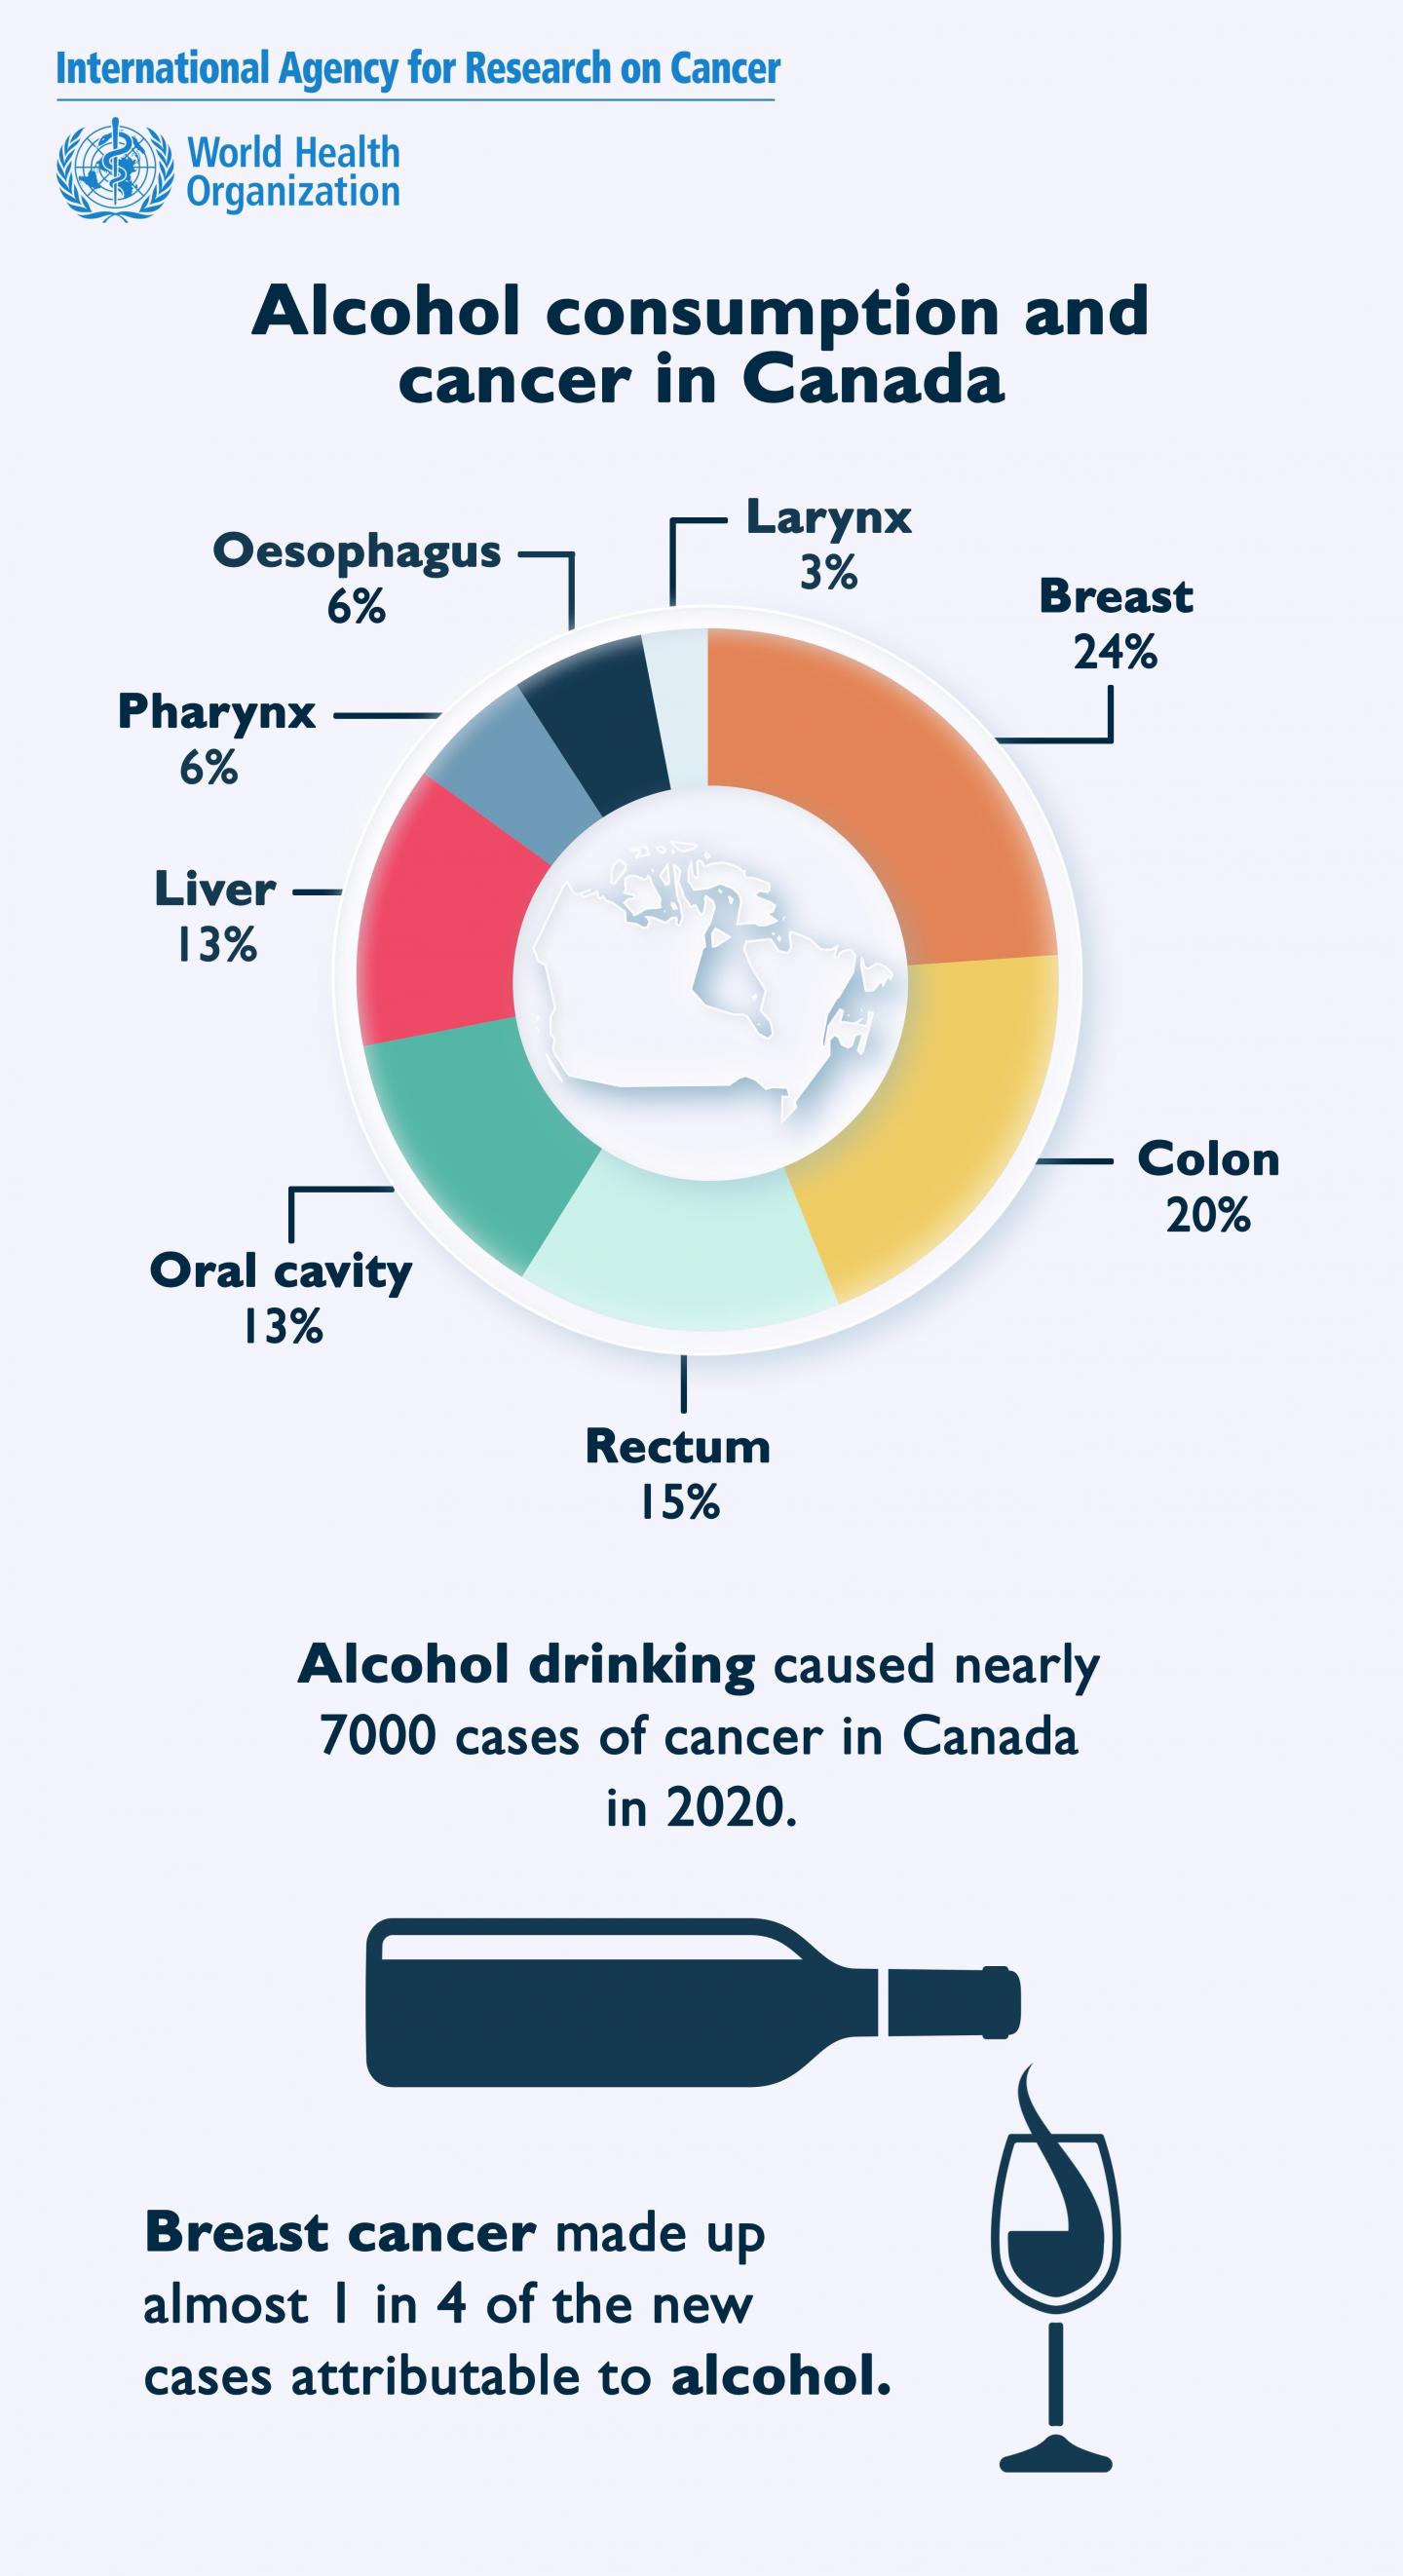 Alcohol consumption and cancer in Canada